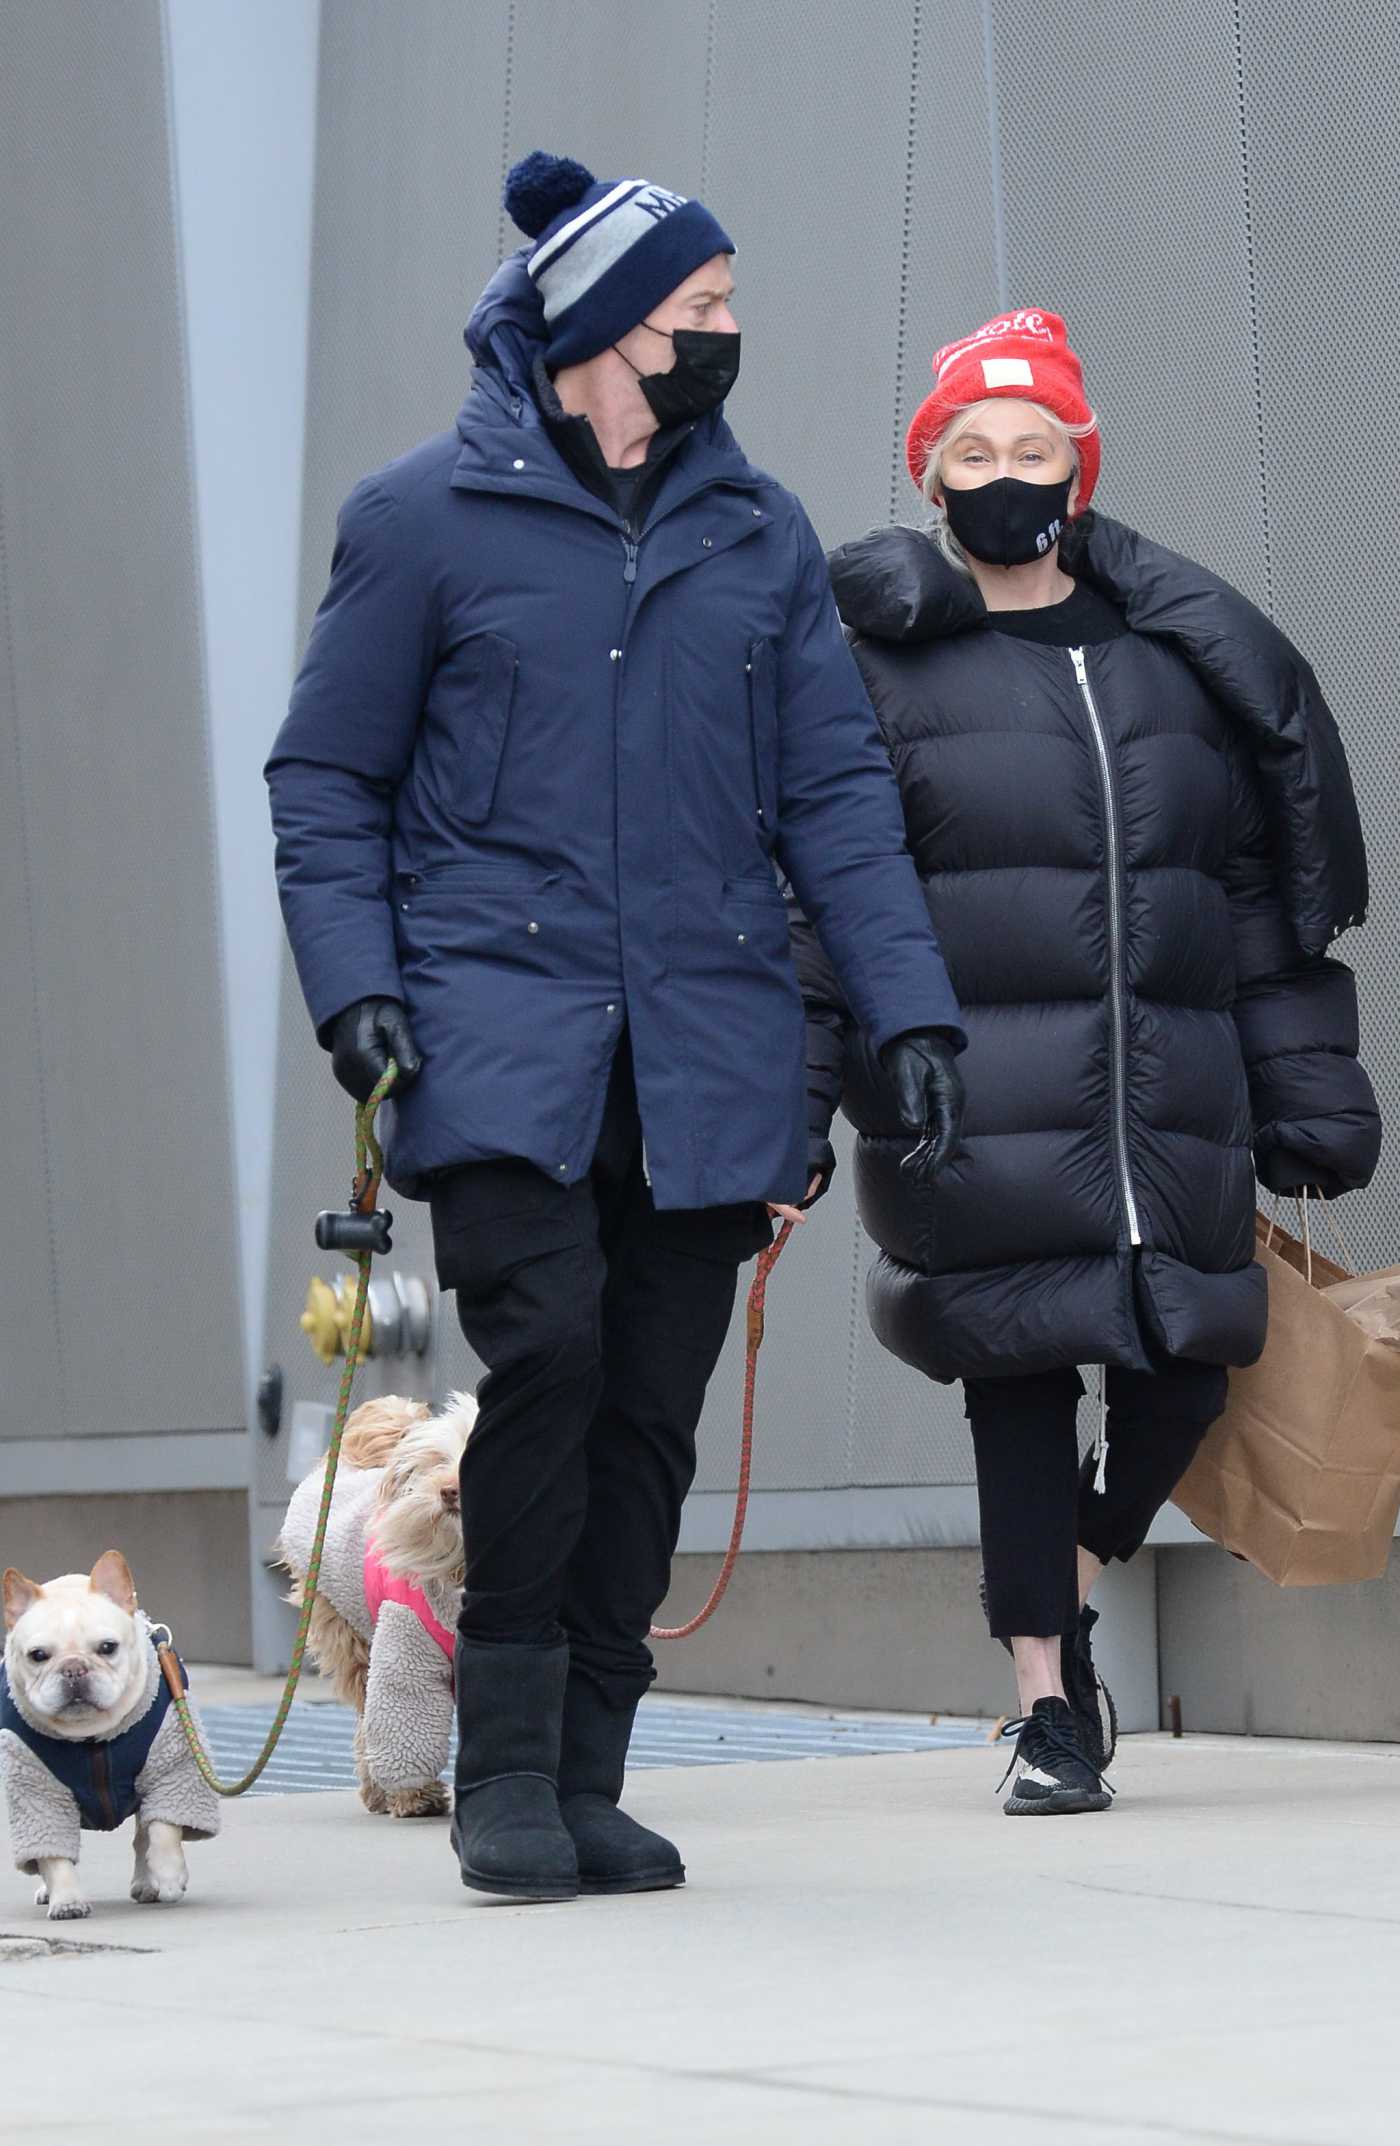 Deborra-Lee Furness in a Black Puffer Coat Steps Out with Hugh Jackman for a Dog Walk in New York 01/16/2022